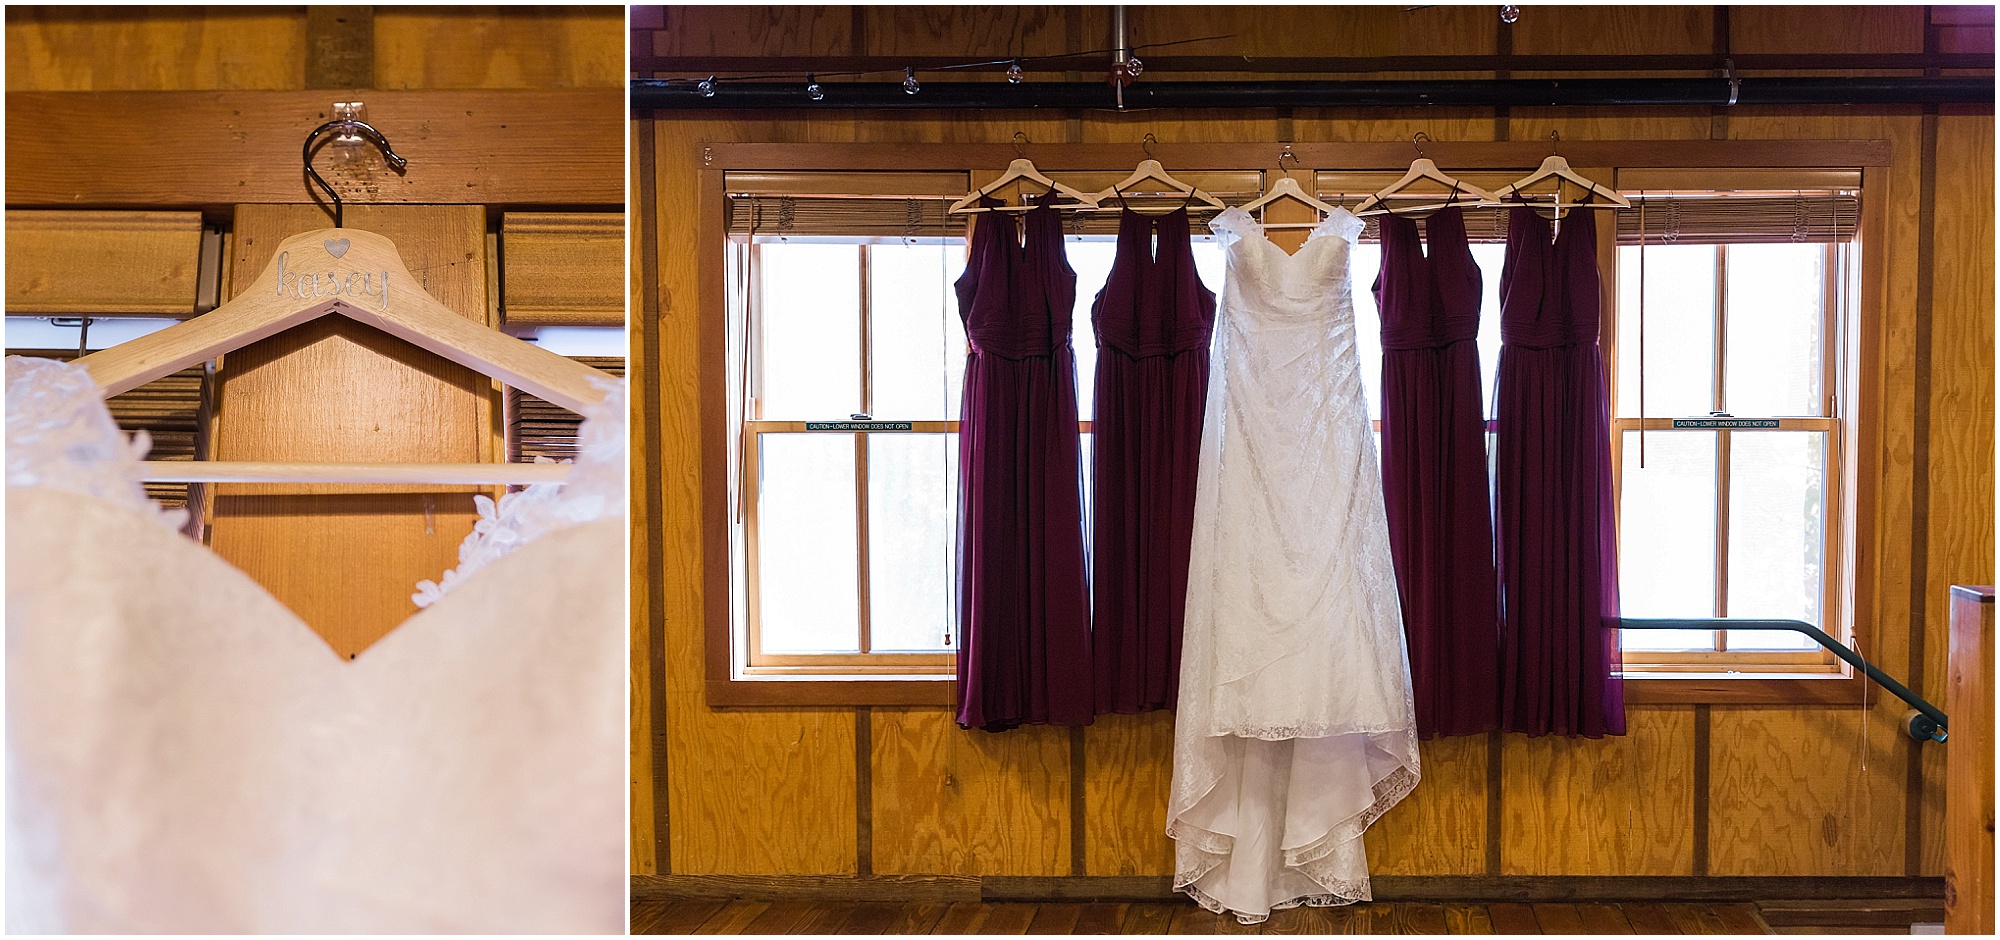 A bride's gown with the bridesmaids dresses hang in the window of the gorgeous Hollinshead Barn in Bend, Oregon. | Erica Swantek Photography